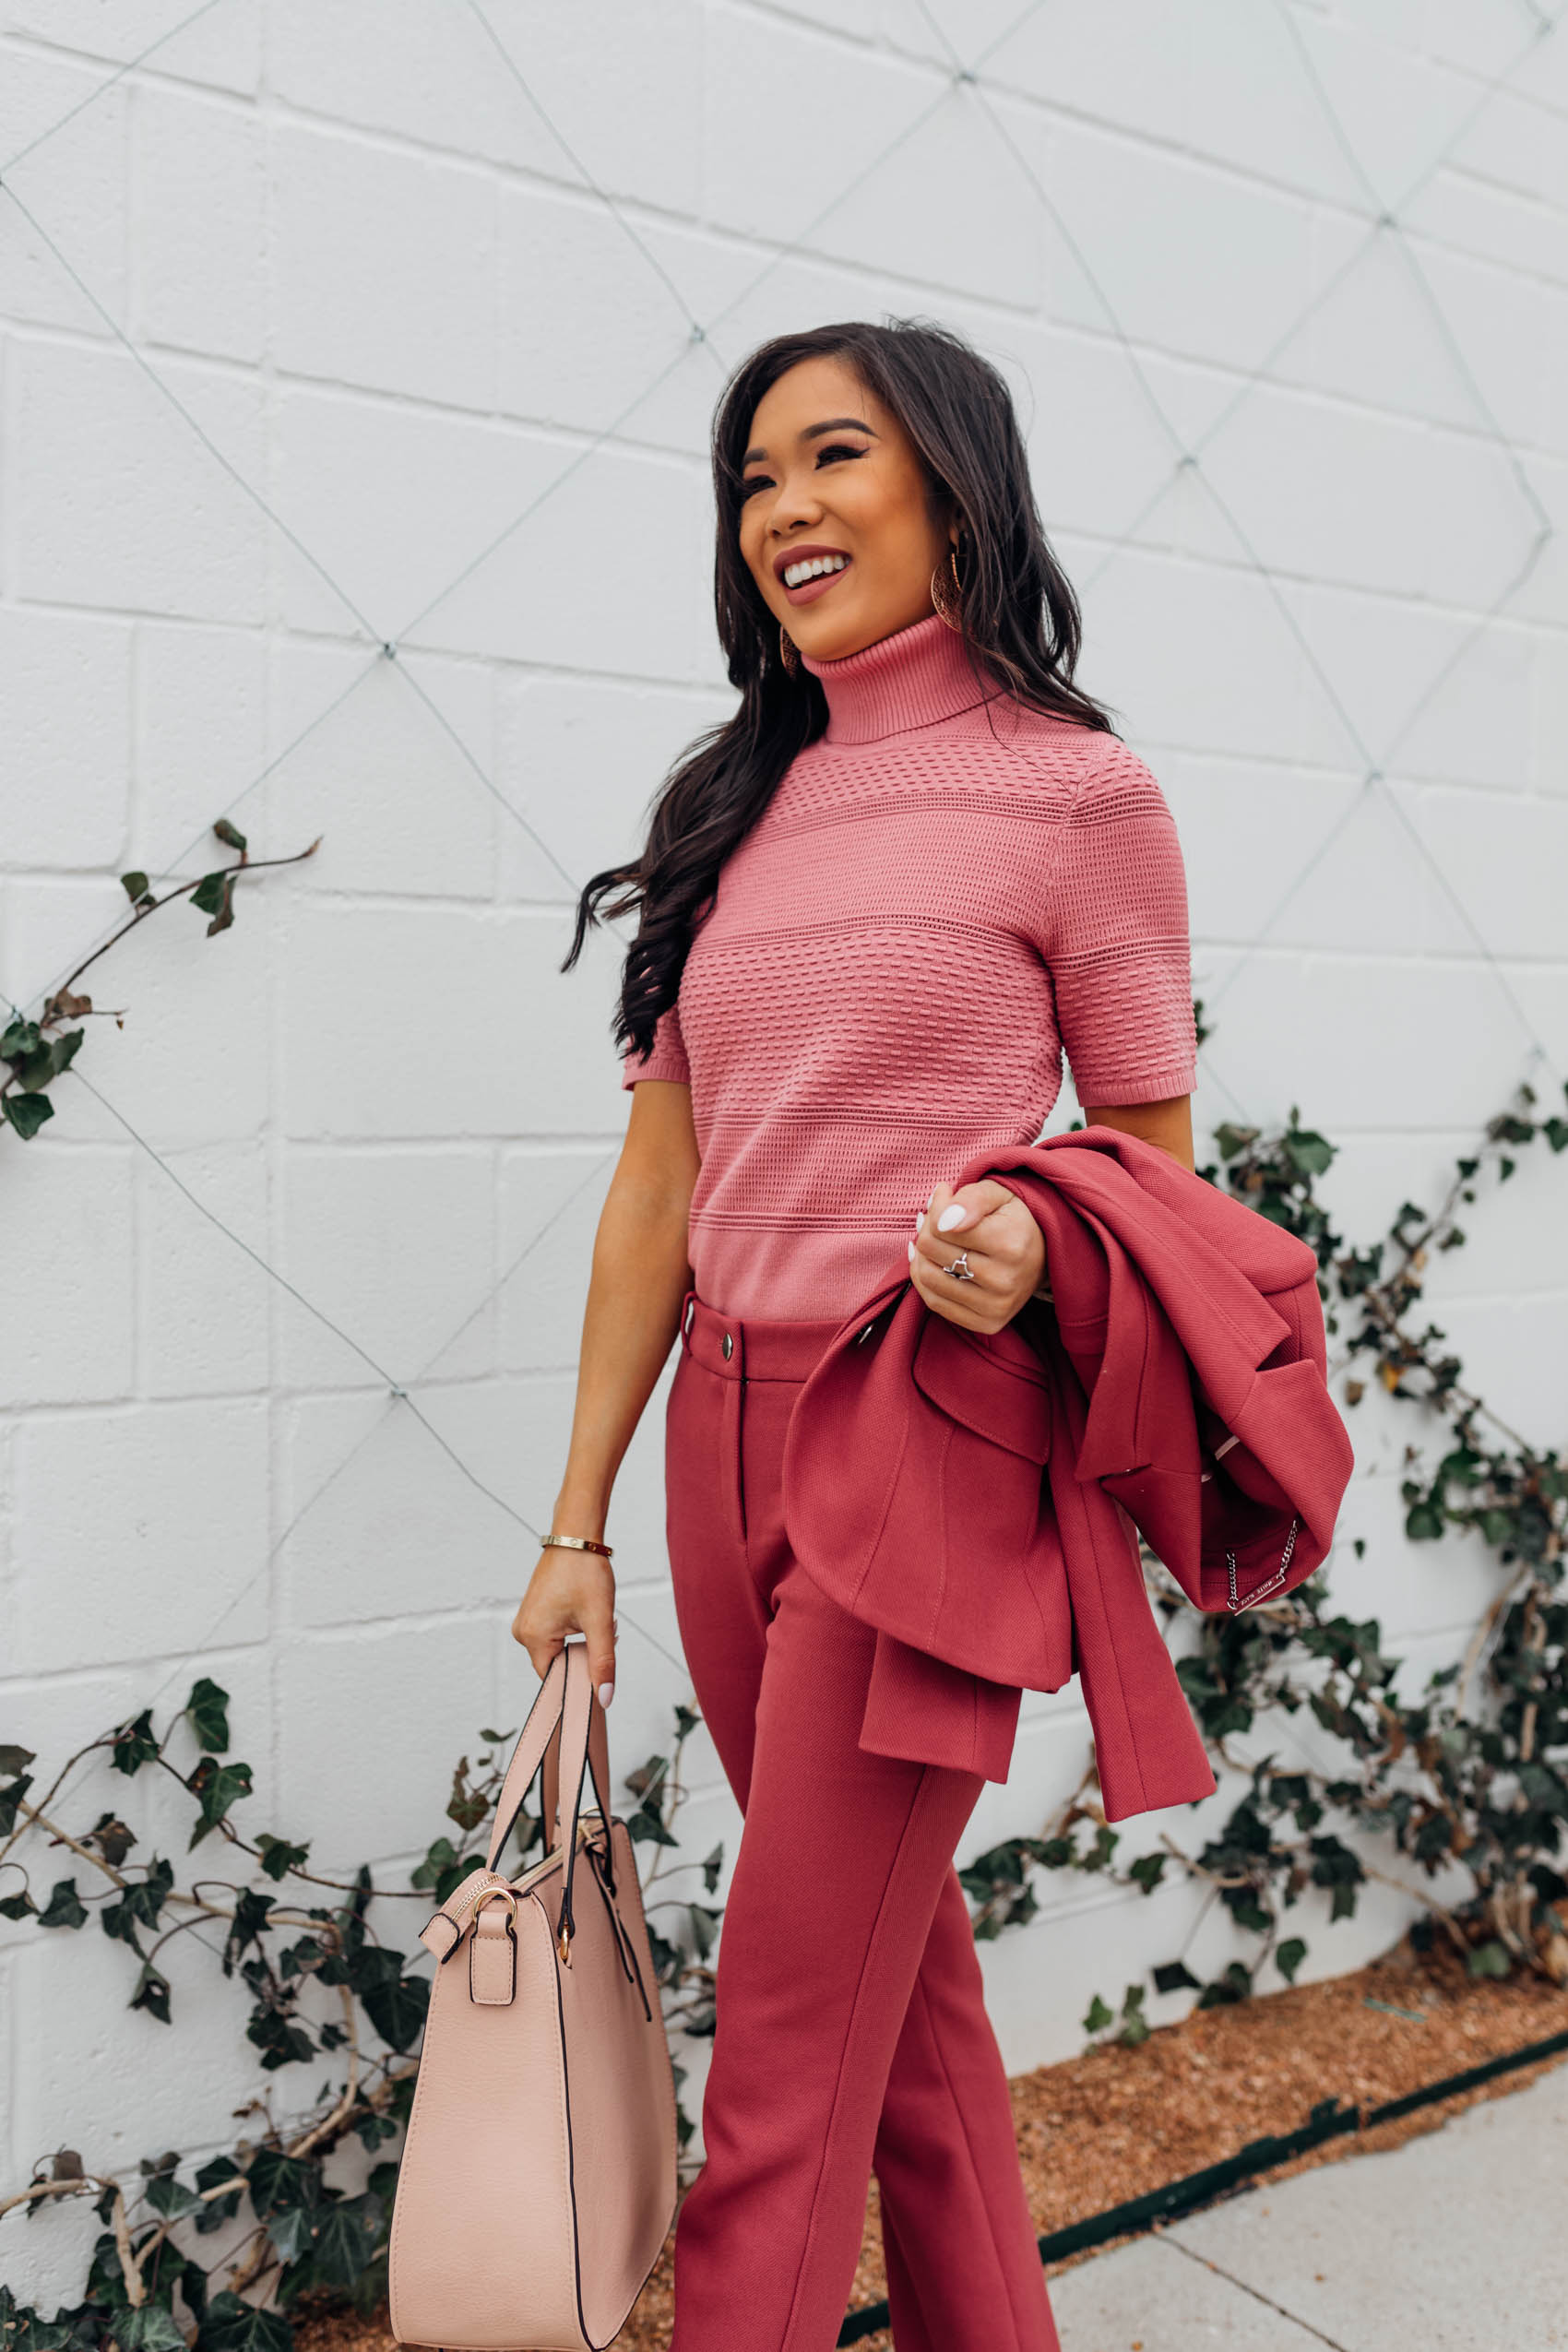 Blogger Hoang-Kim shares a colorful workwear style